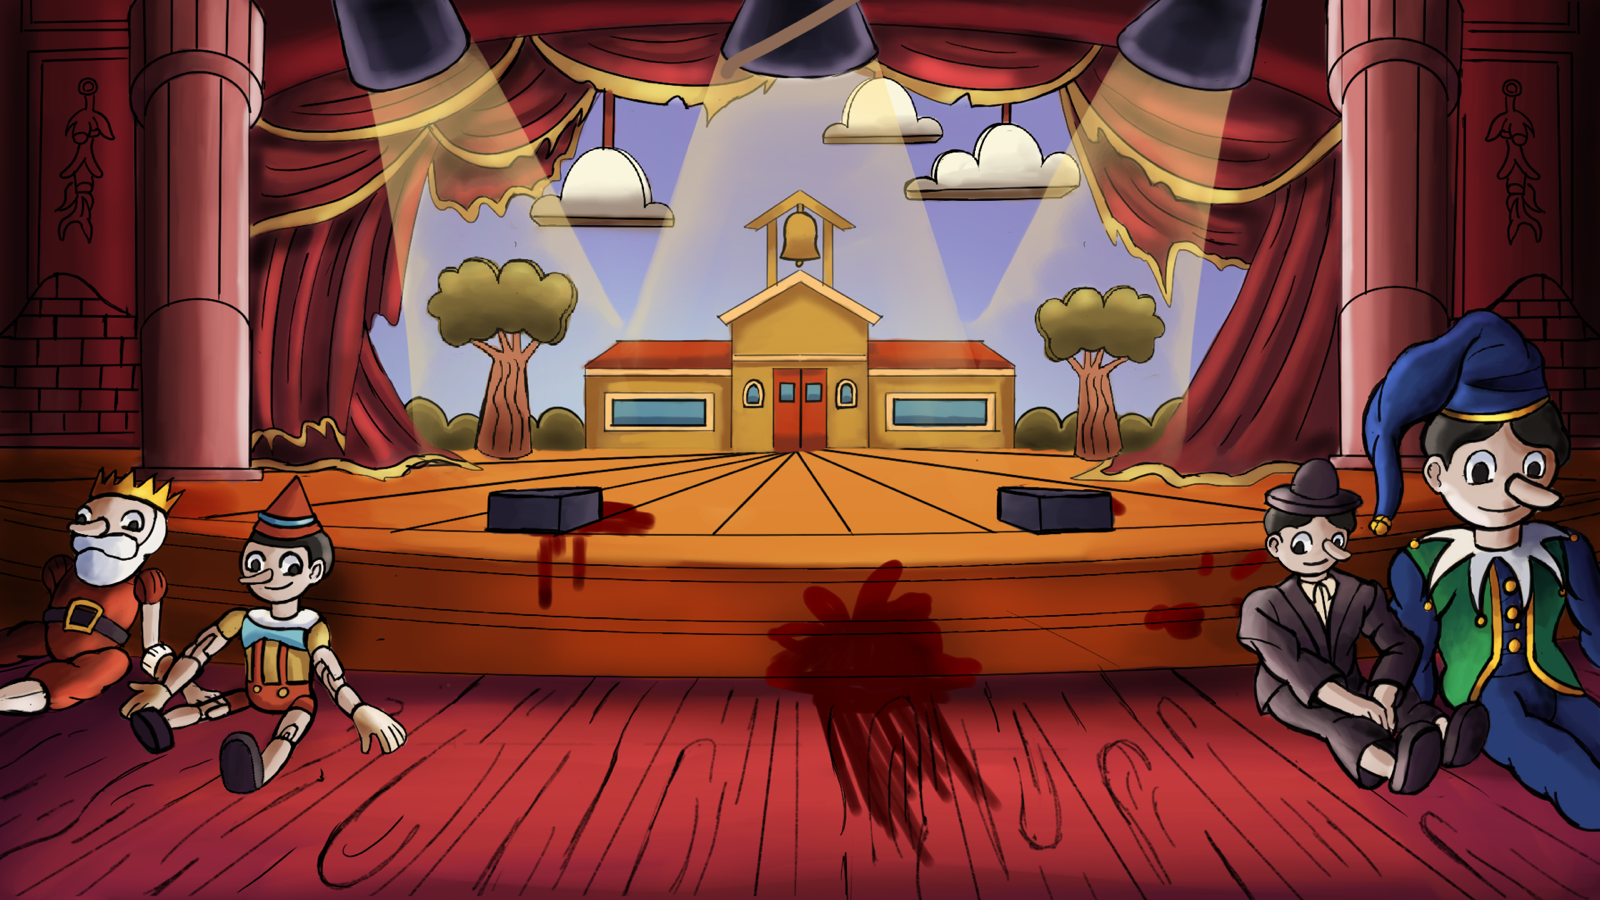 Puppet Theatre Stage for "Punchy Pals Premium" Project